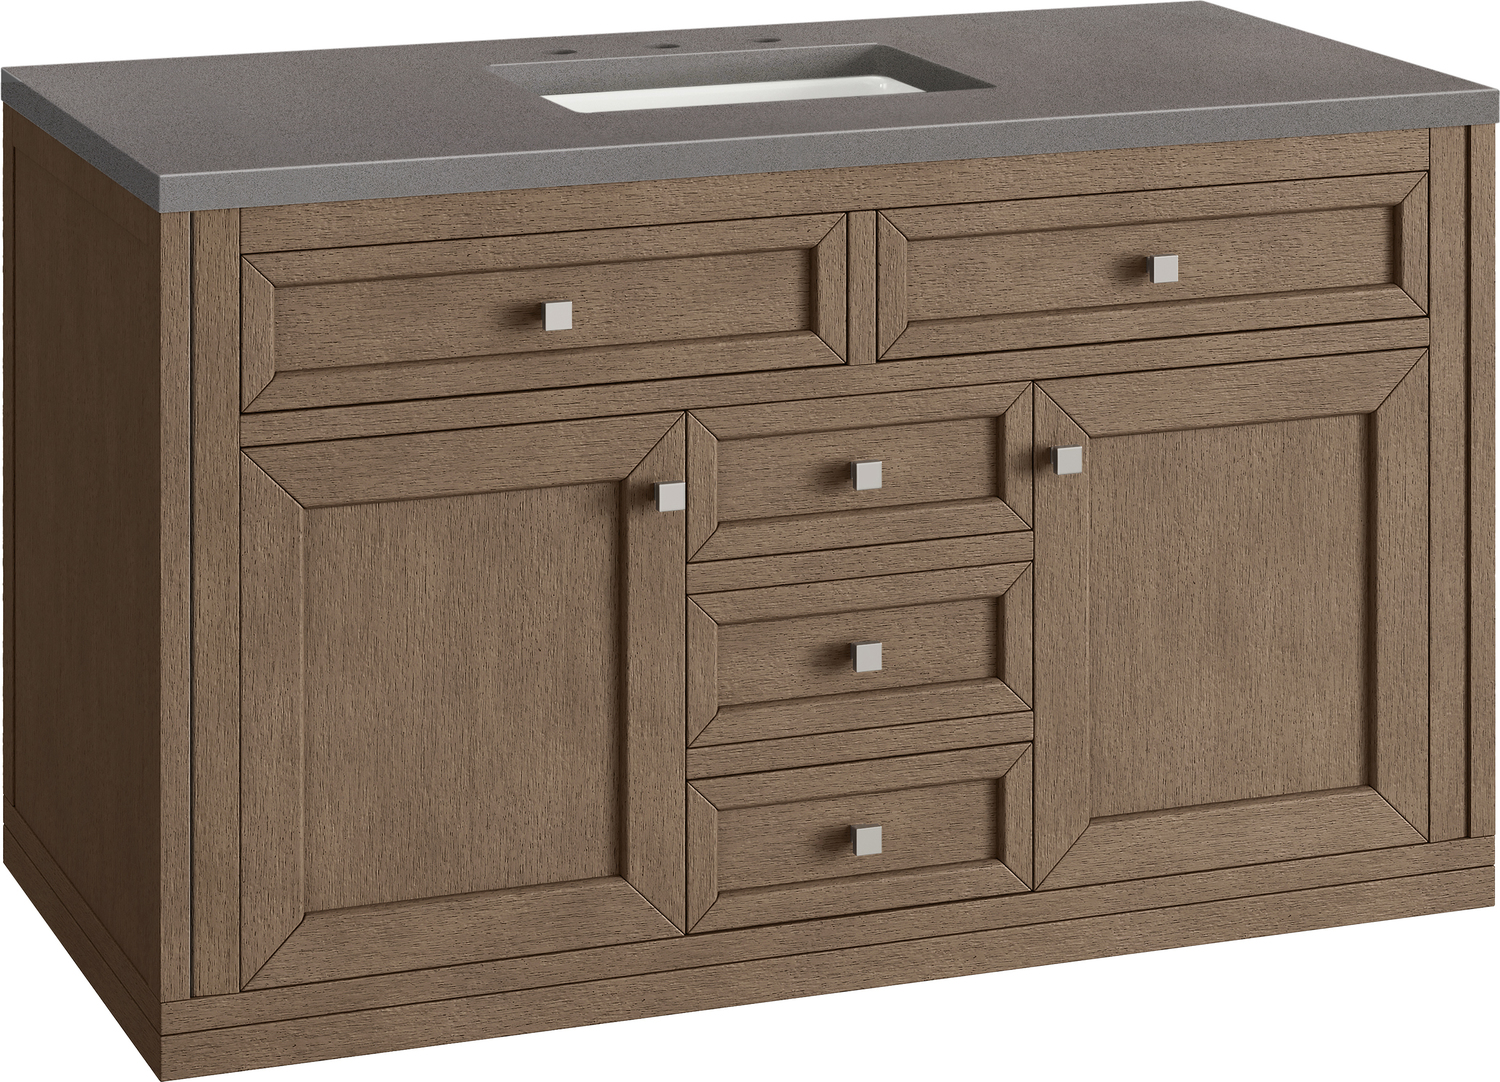 90 inch double vanity James Martin Vanity Whitewashed Walnut Contemporary/Modern, Transitional